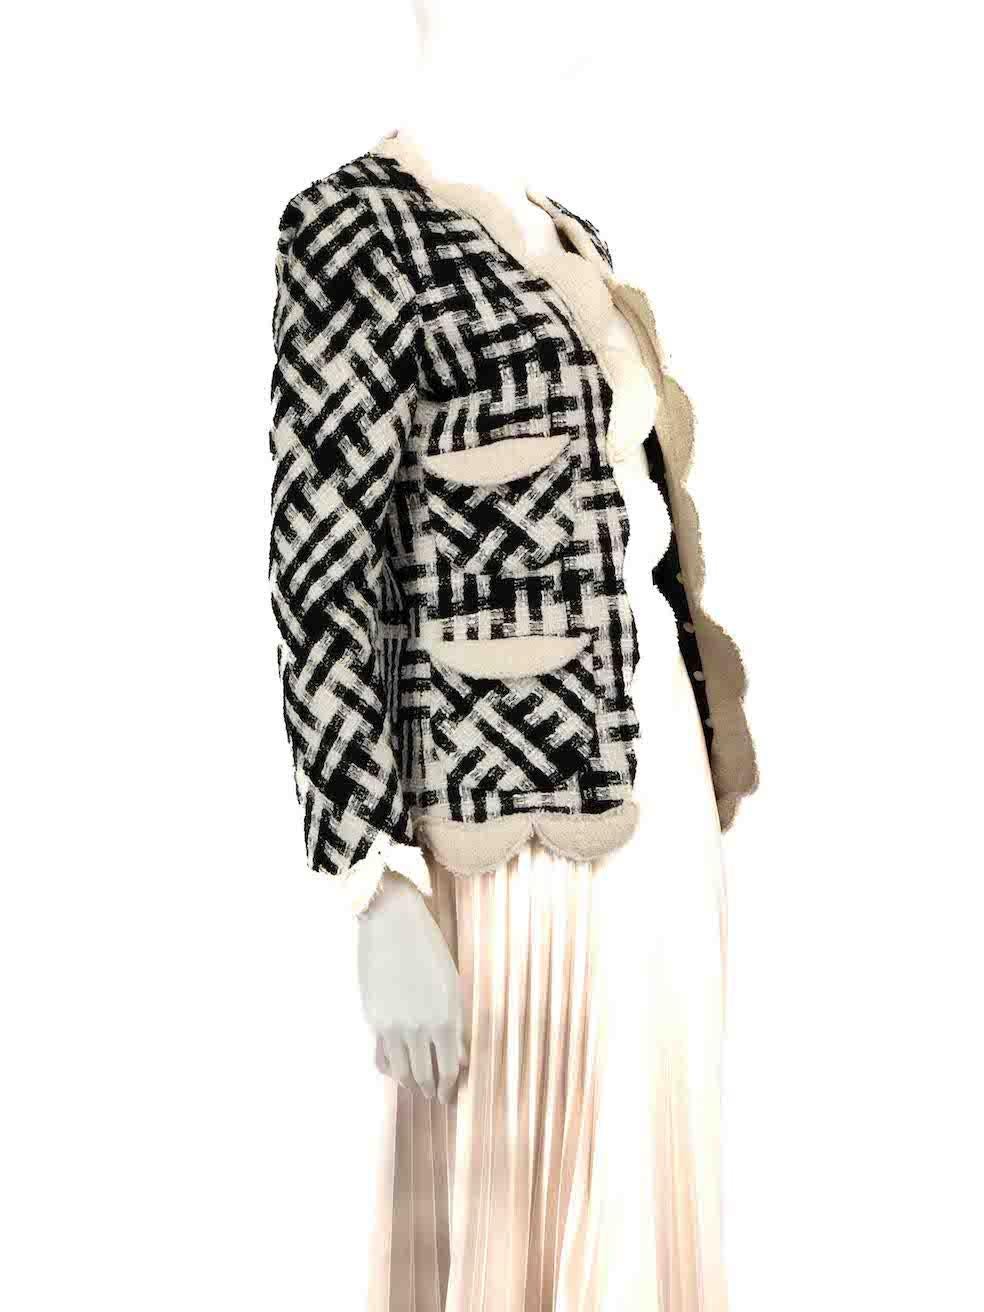 CONDITION is Very good. Hardly any visible wear to jacket is evident on this used Marc Jacobs designer resale item.
 
 
 
 Details
 
 
 Black and white
 
 Wool
 
 Jacket
 
 Checkered pattern
 
 Scalloped edge
 
 Open front
 
 4x Front pockets
 
 
 
